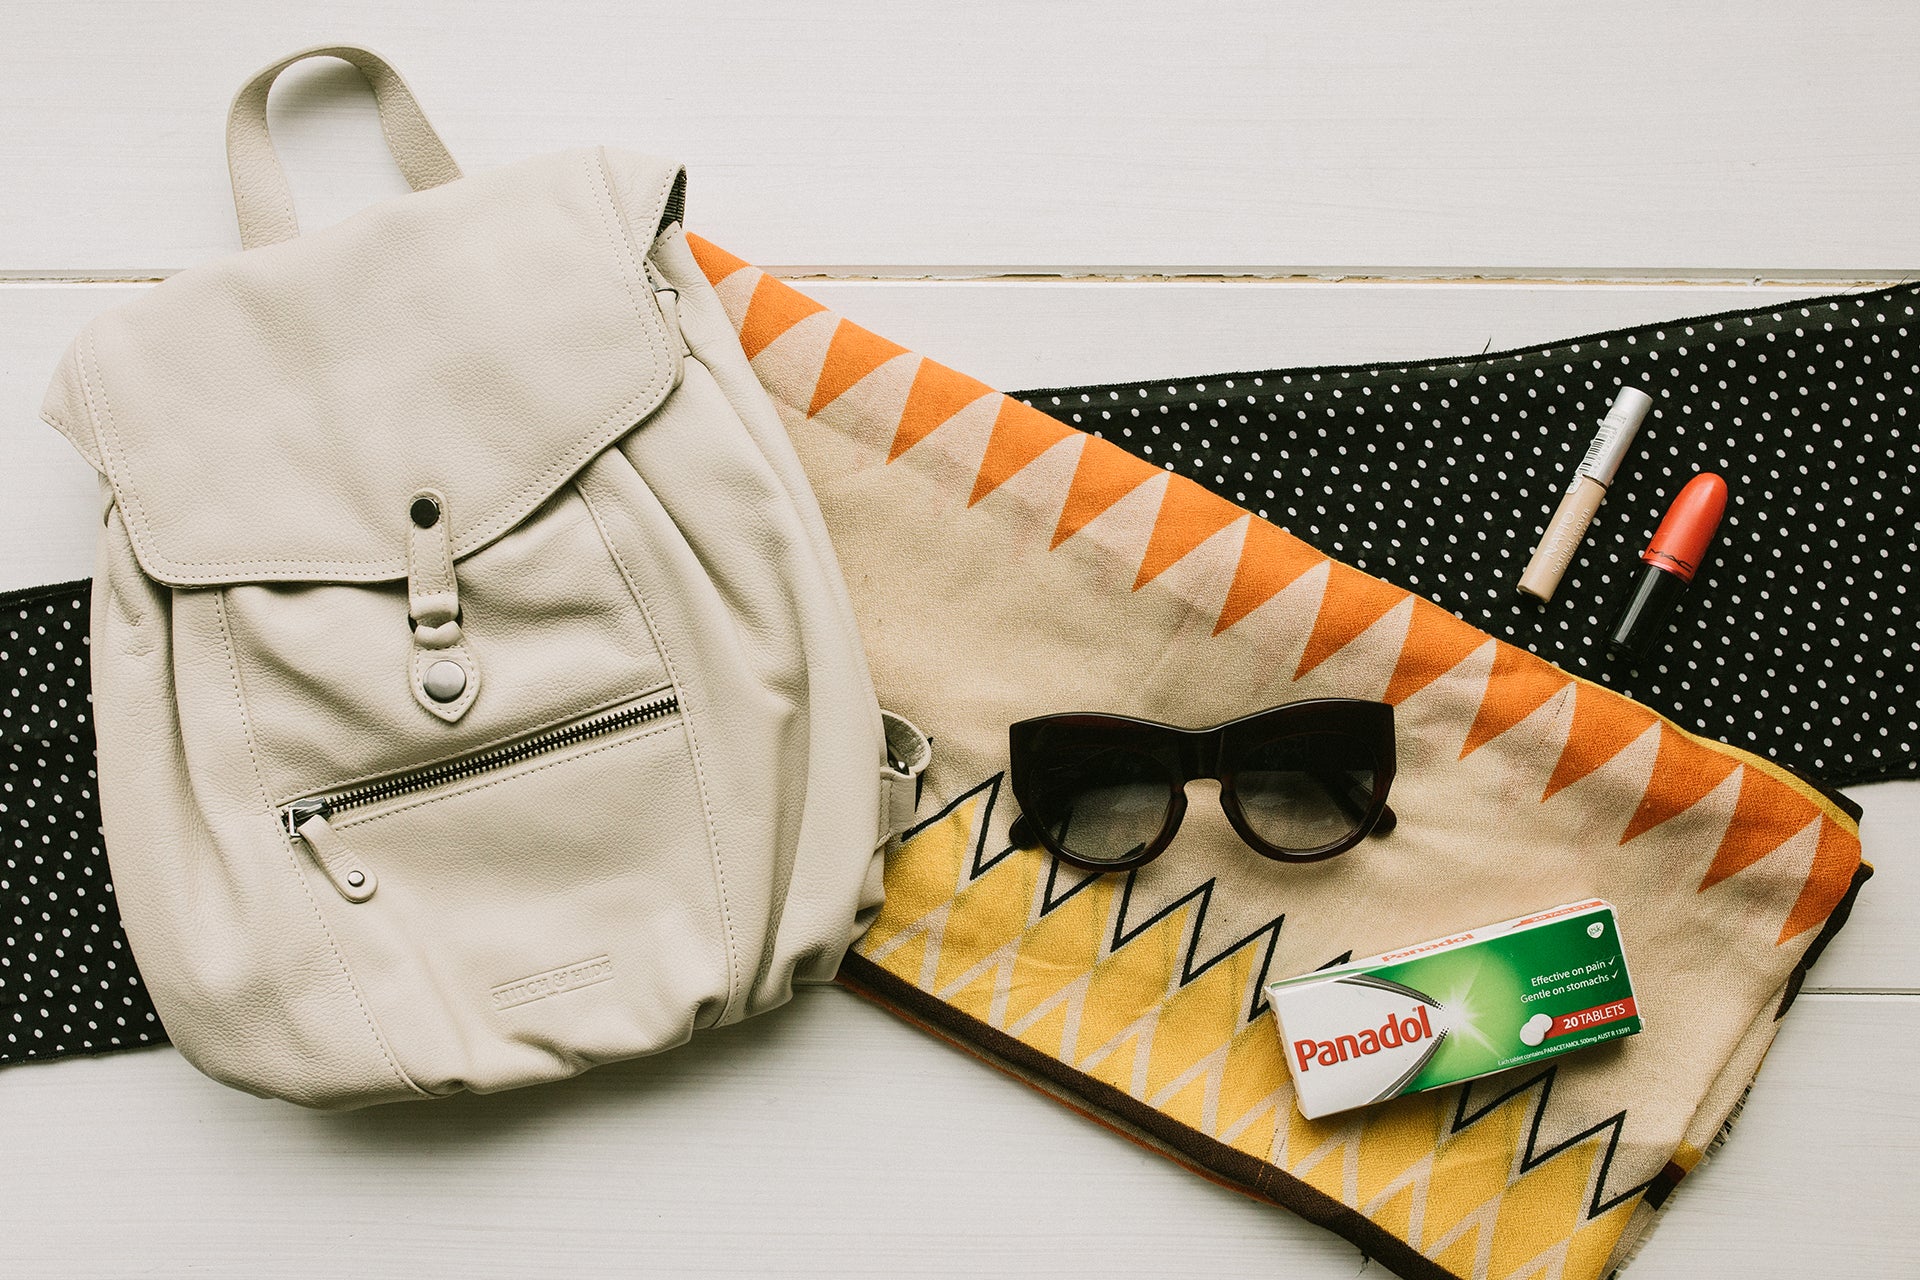 Splendour In The Grass: What's in your bag?